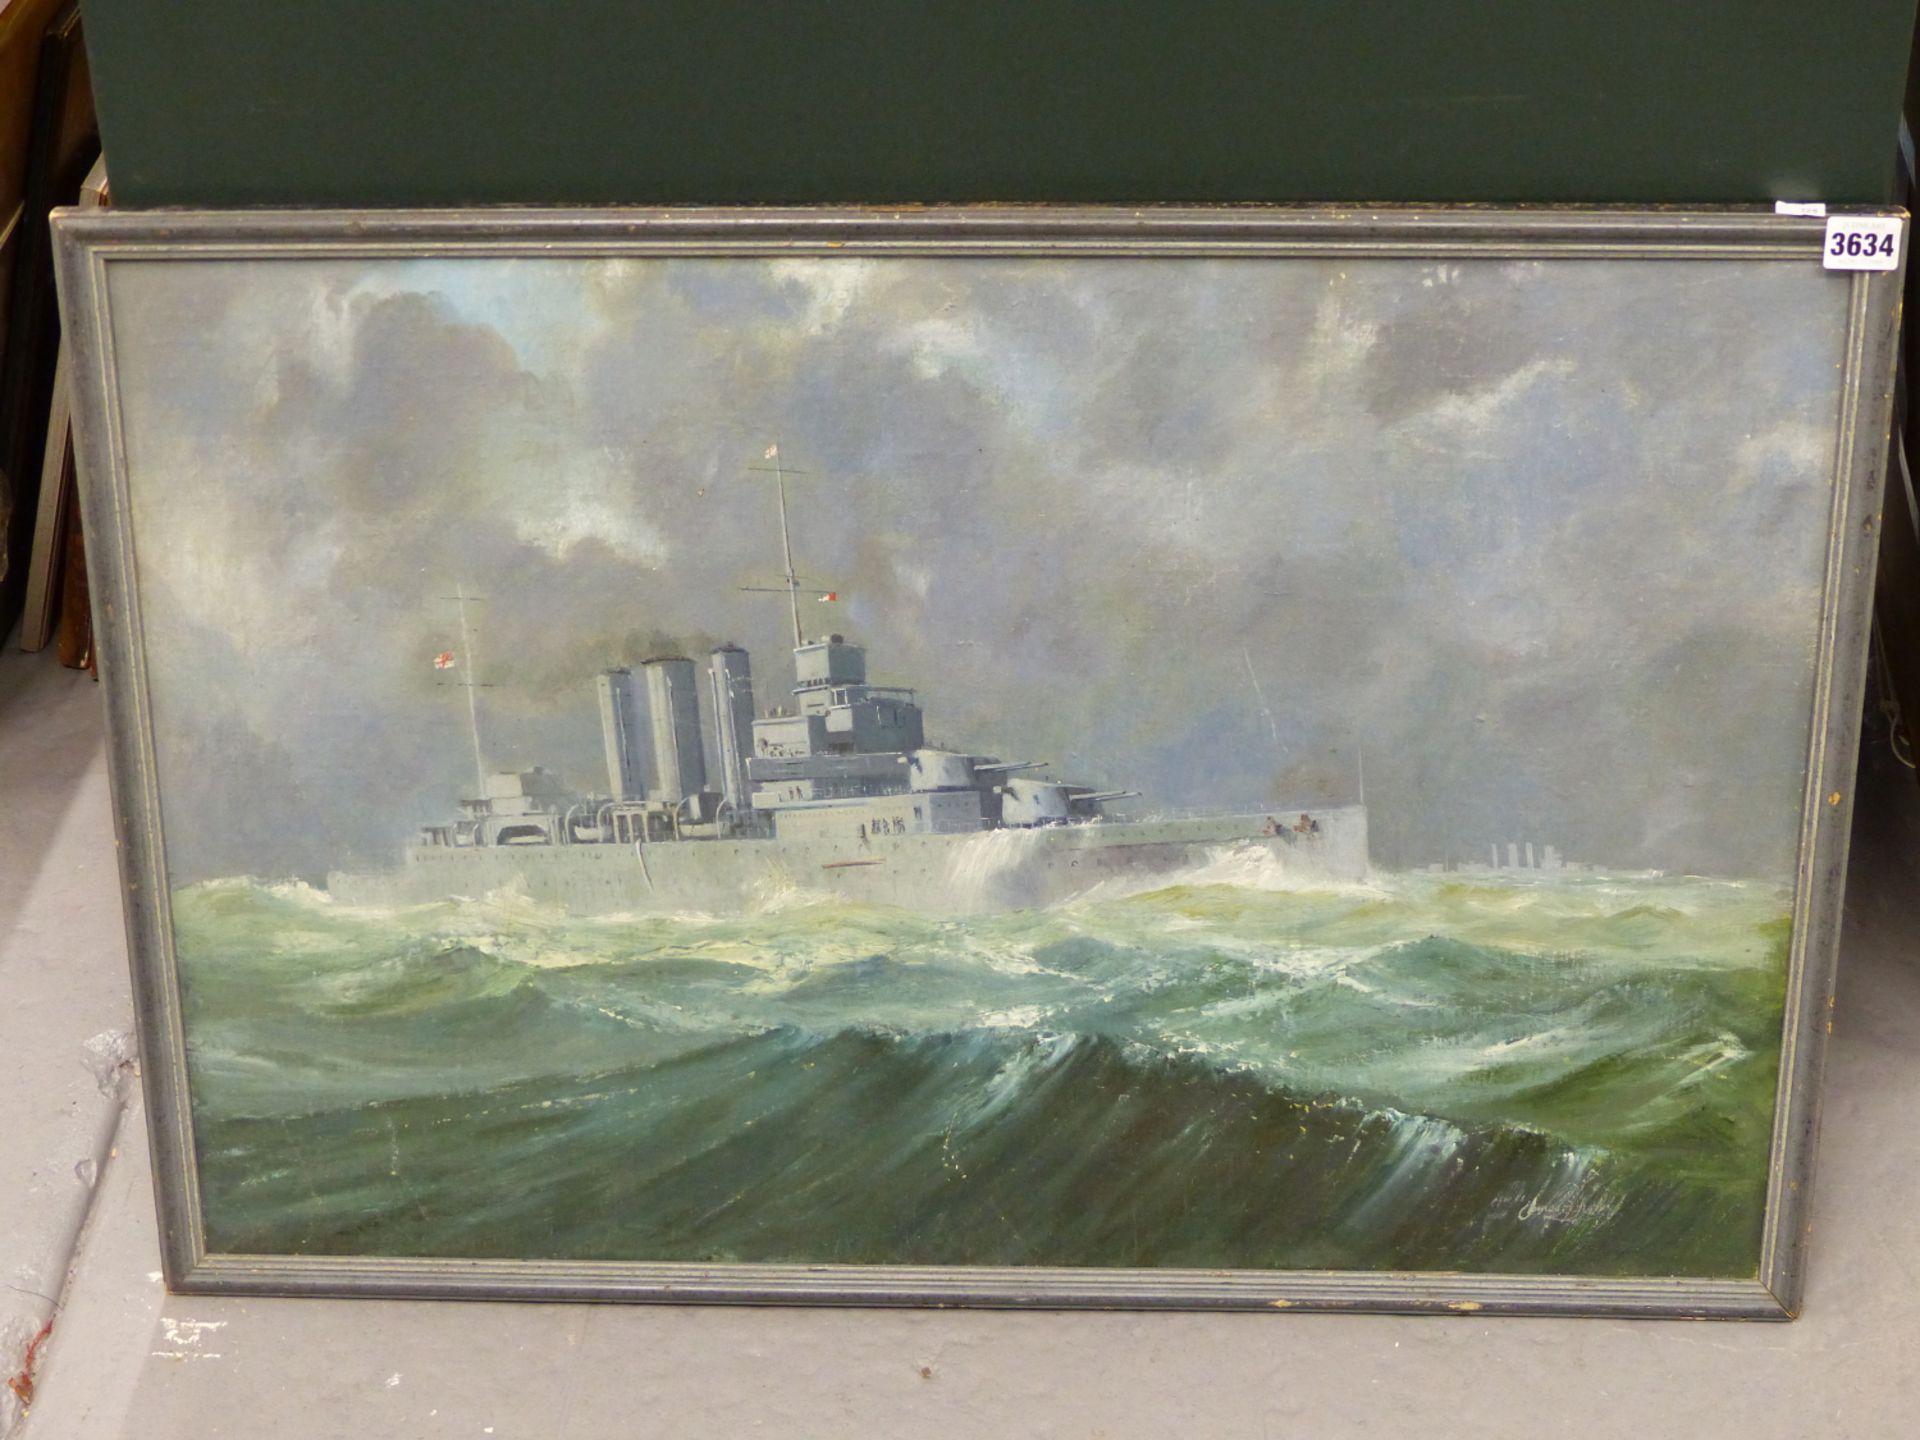 20TH CENTURY ENGLISH SCHOOL, STUDY OF A BRITISH OR AUSTRALIAN COUNTY CLASS NAVAL BATTLE CRUISER IN - Image 2 of 5